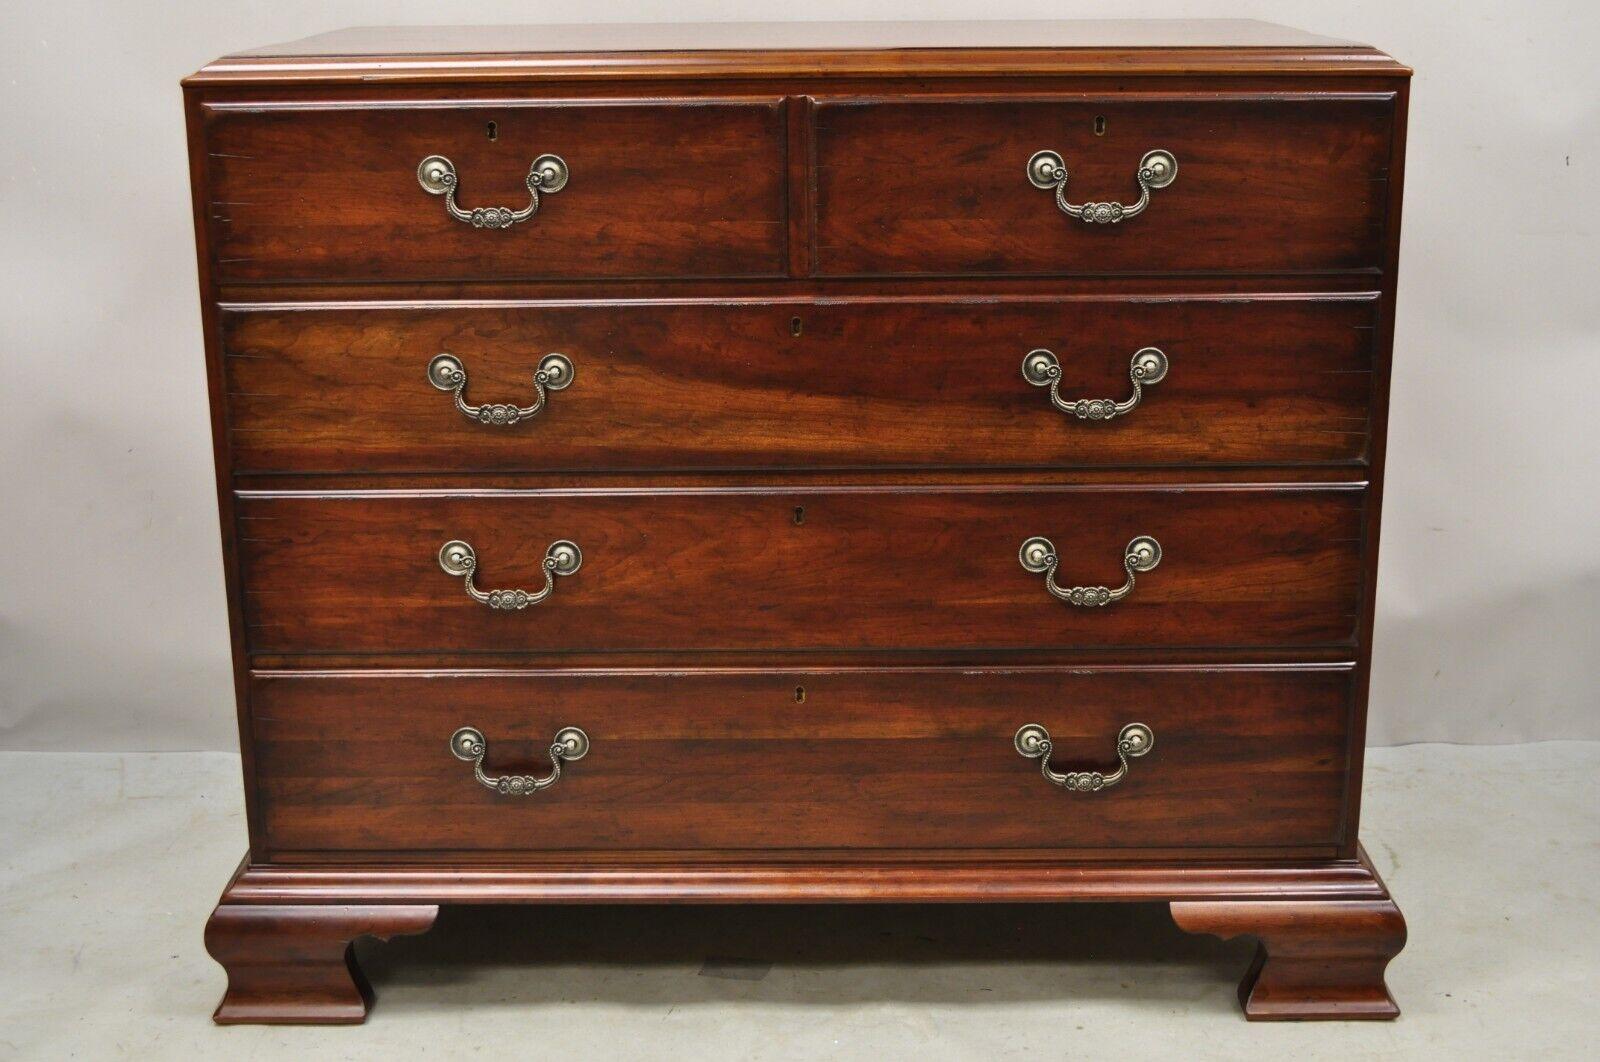 Drexel Heritage Cambridge Cherry Wood Four Drawer Dresser Chest. Item featured is a nice larger size, distressed finish, solid cherry wood construction, faux keyholes, quality American craftsmanship. Circa Late 20th Century. Measurements: 38